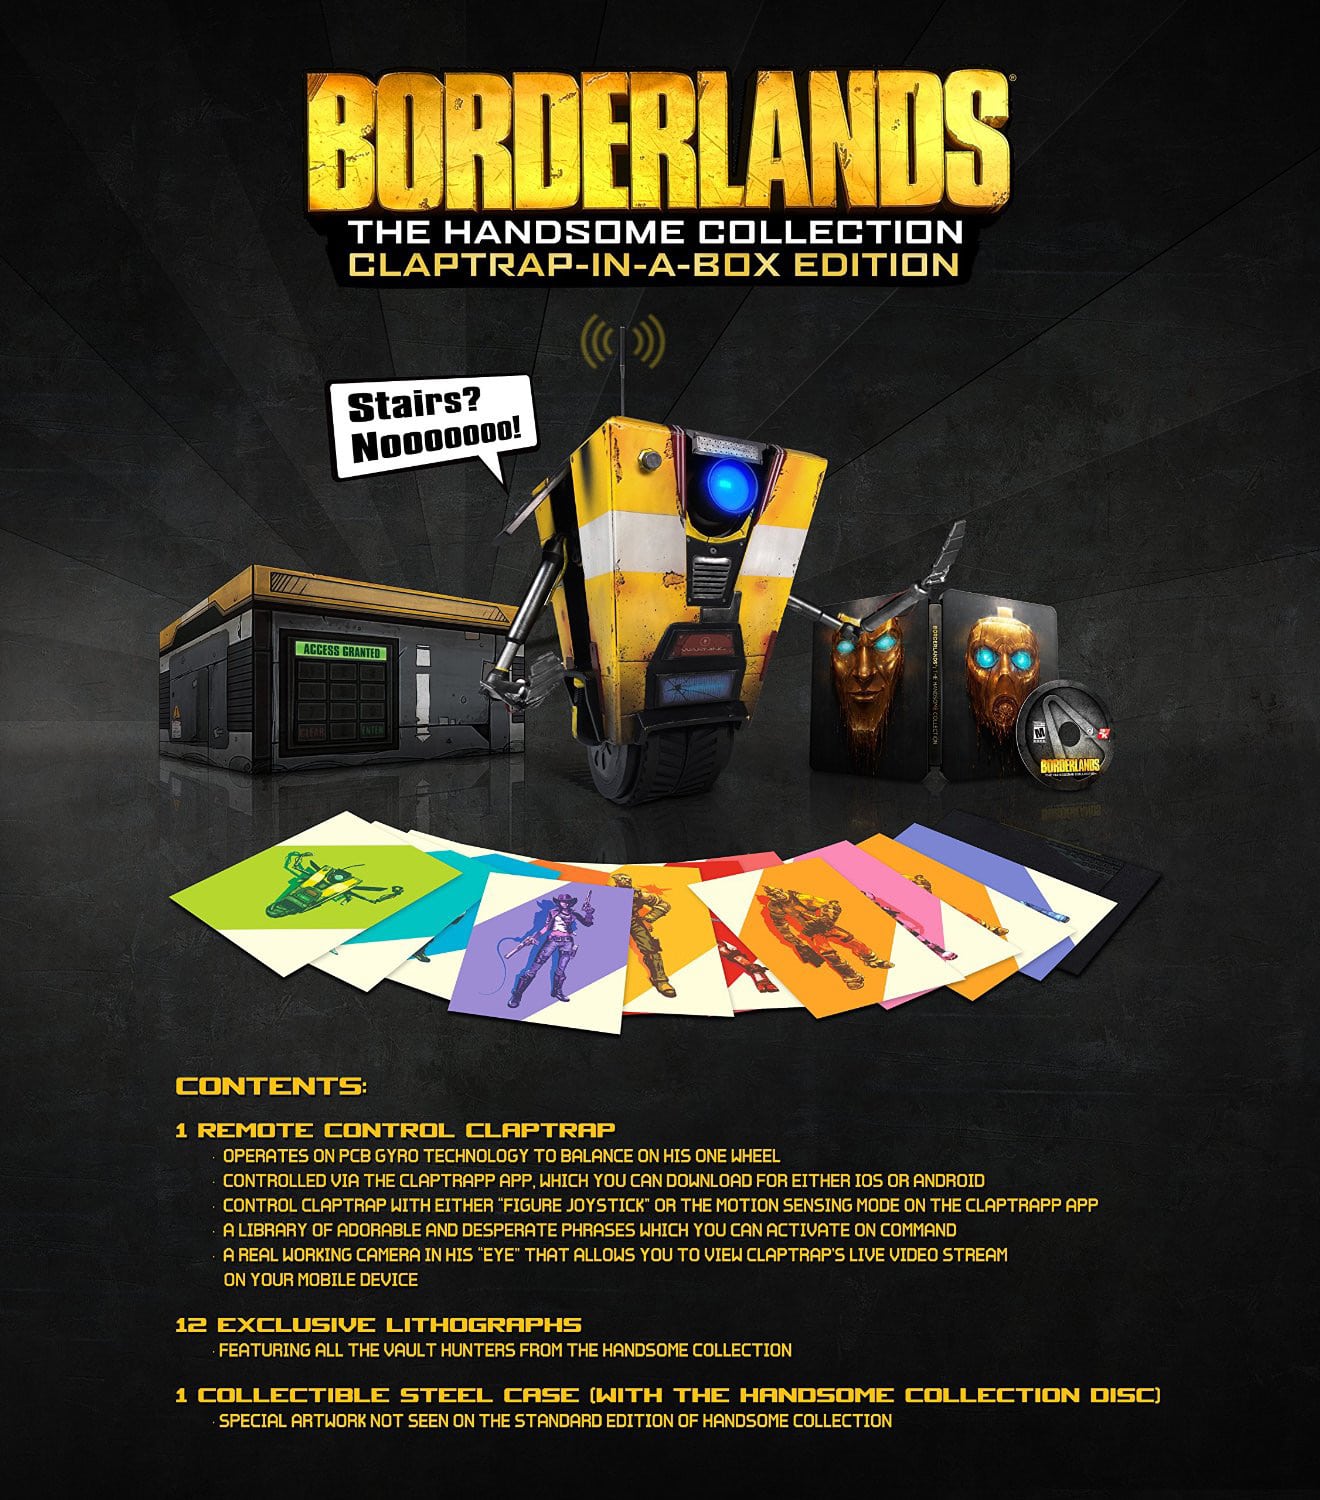 Borderlands The Handsome Collection Claptrap-in-a-Box Edition